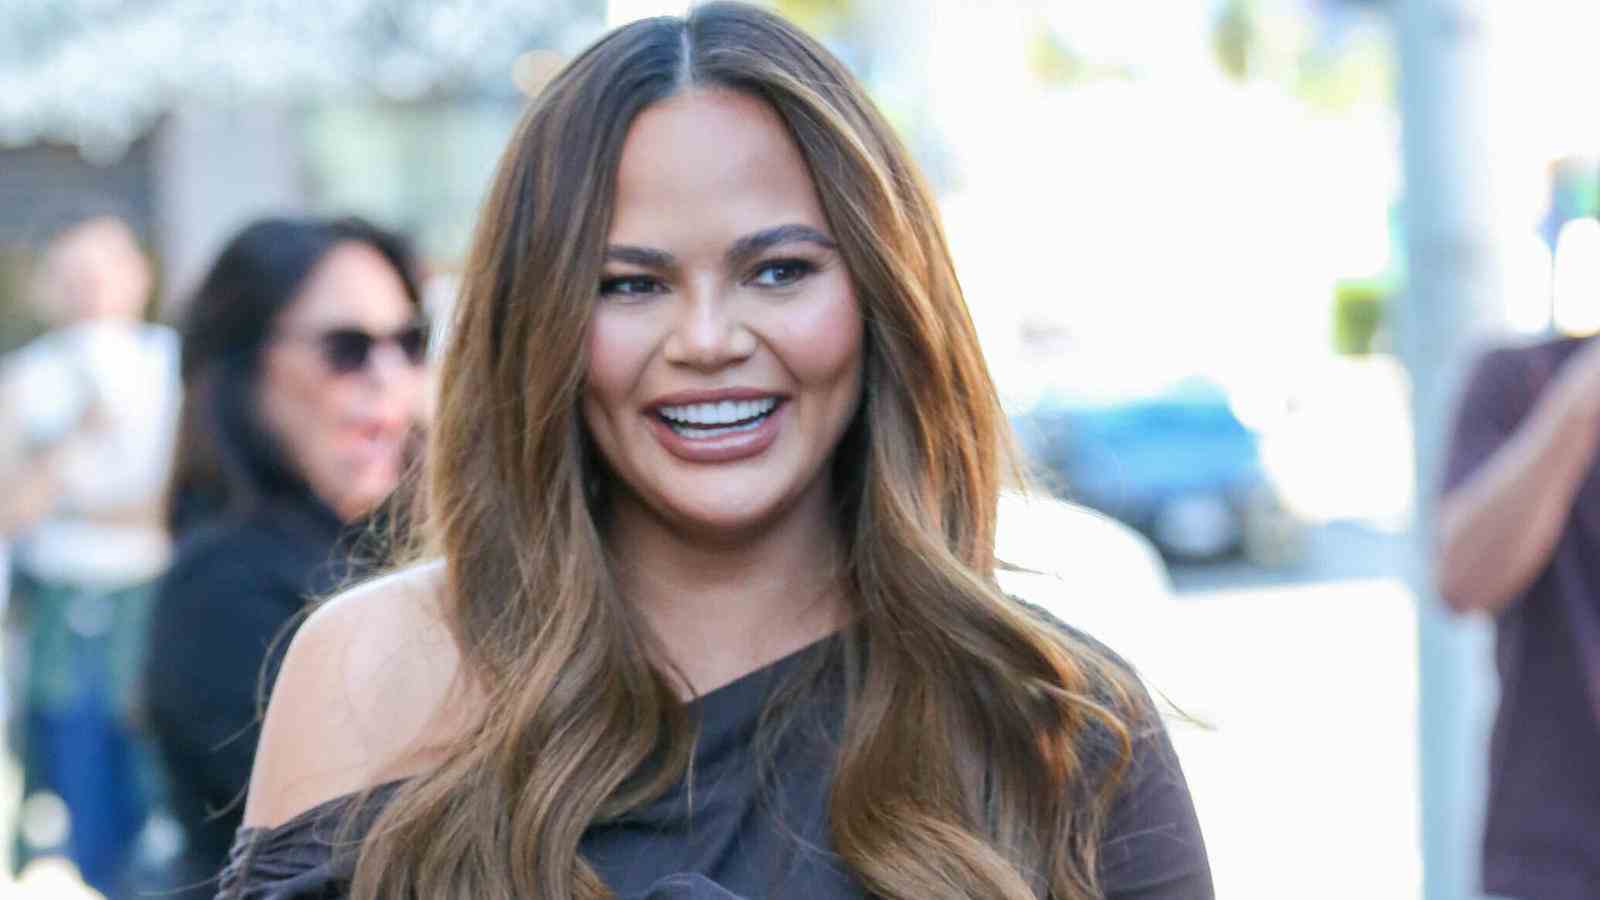 Chrissy Teigen is completely naked with a baby bump